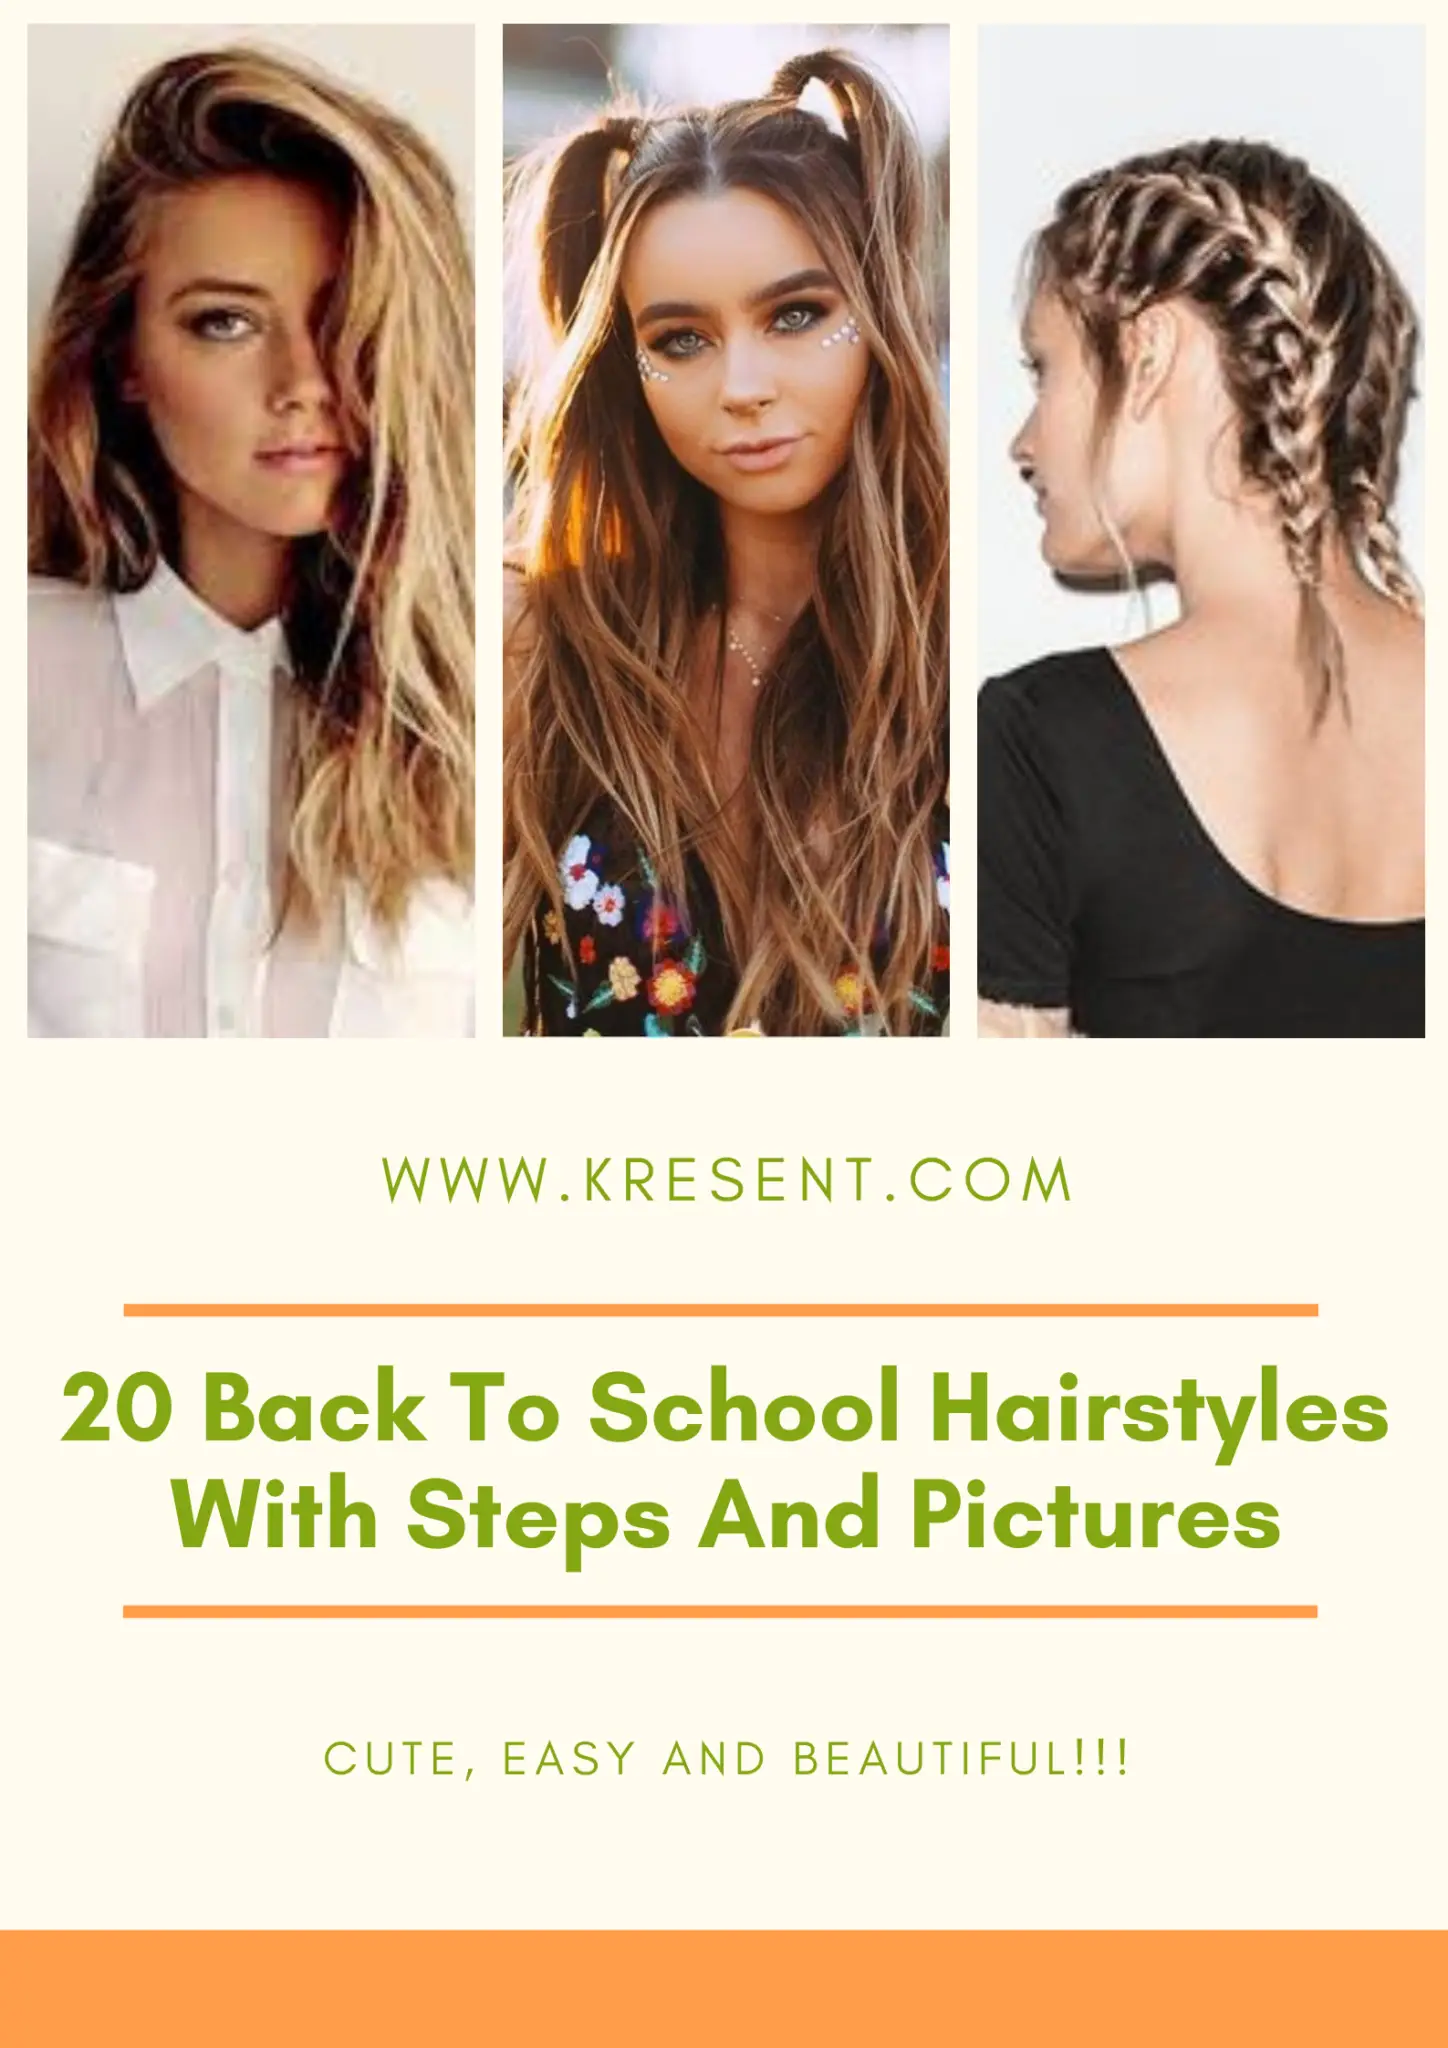 20 Back To School Hairstyles With Steps And Pictures – Fashion